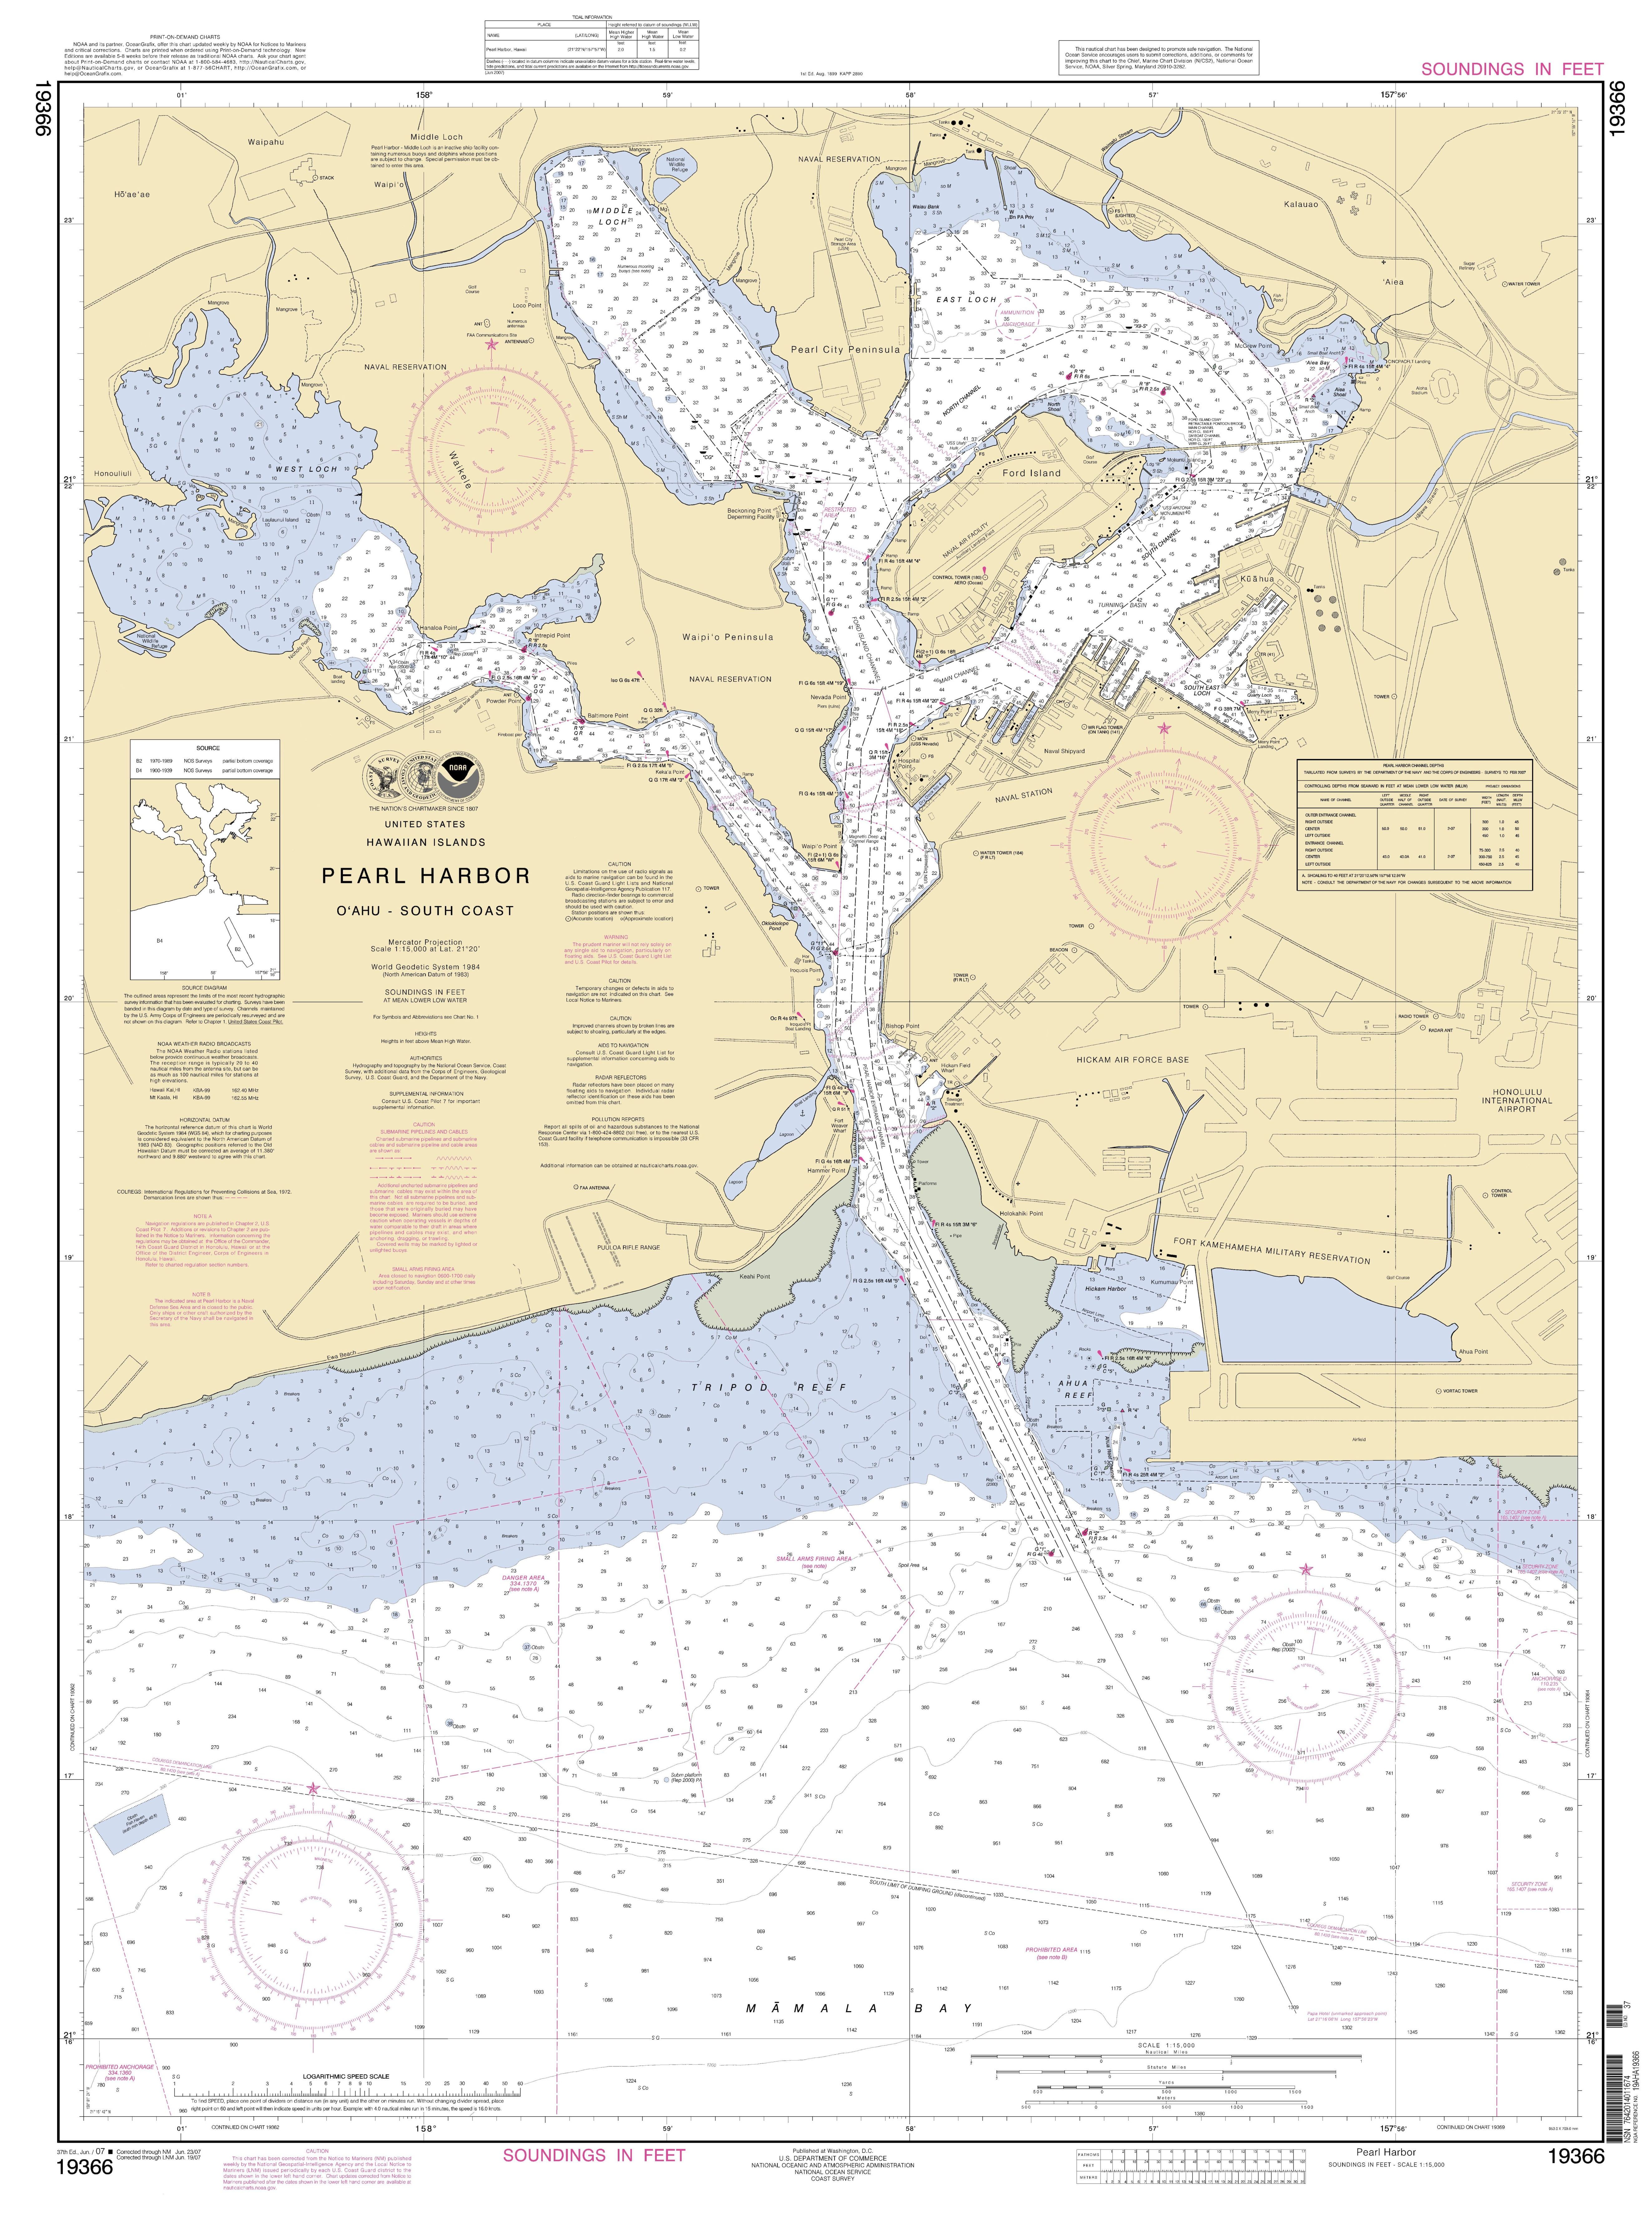 Peal Harbor Navigational Chart with approaches, 2007